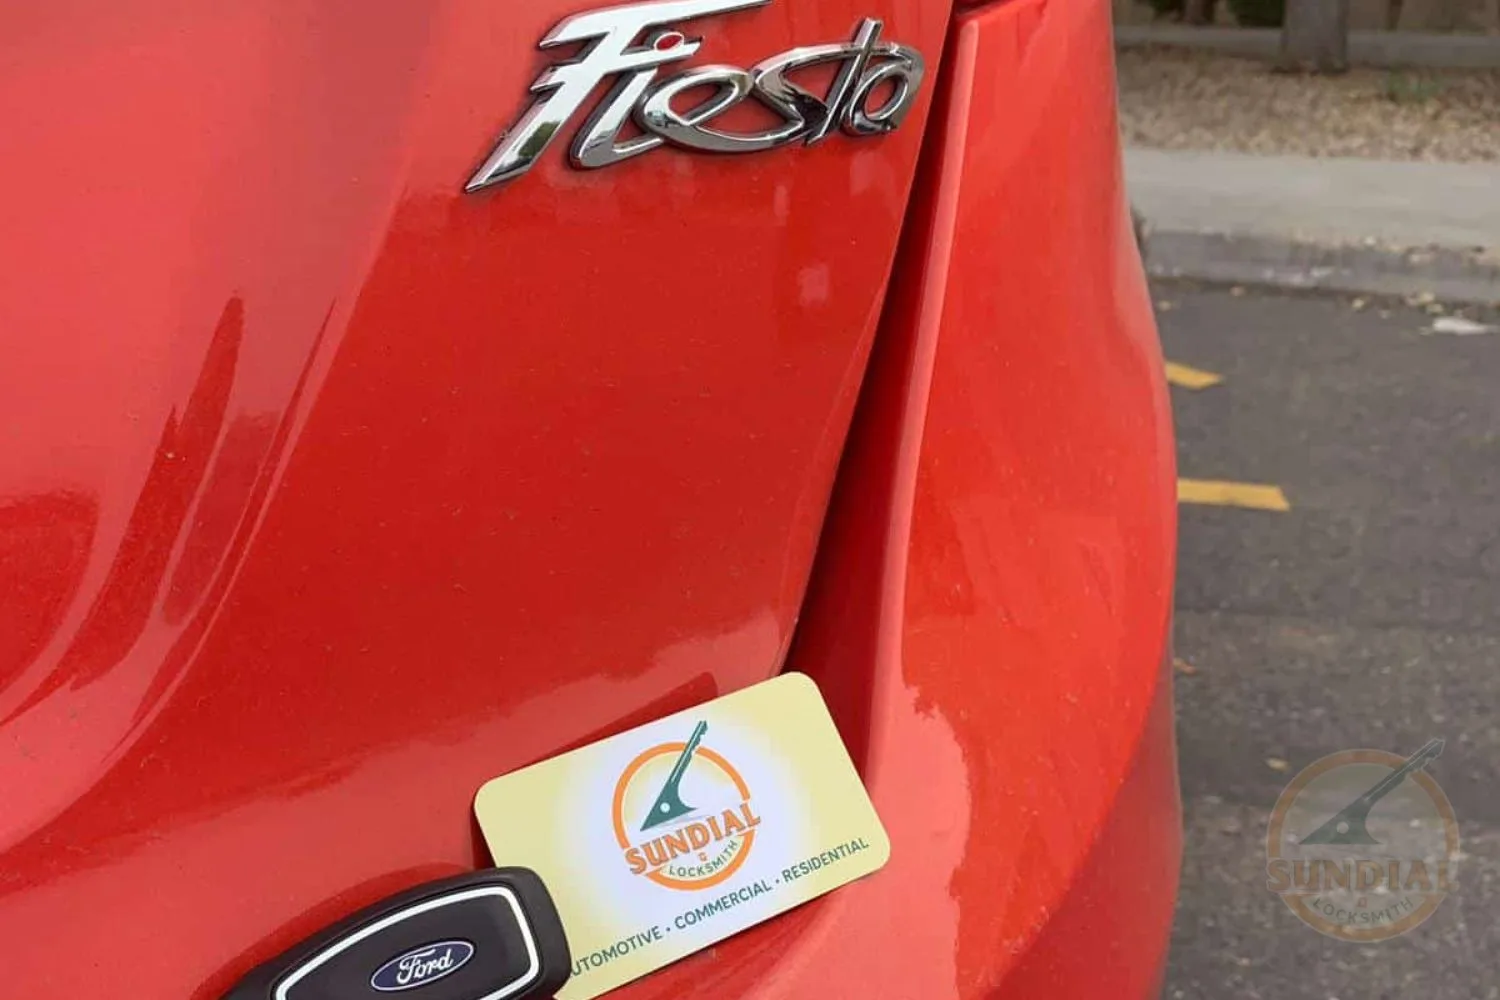 A Ford car key fob and a Sundial Locksmith business card displayed on the rear of a red Ford Fiesta.